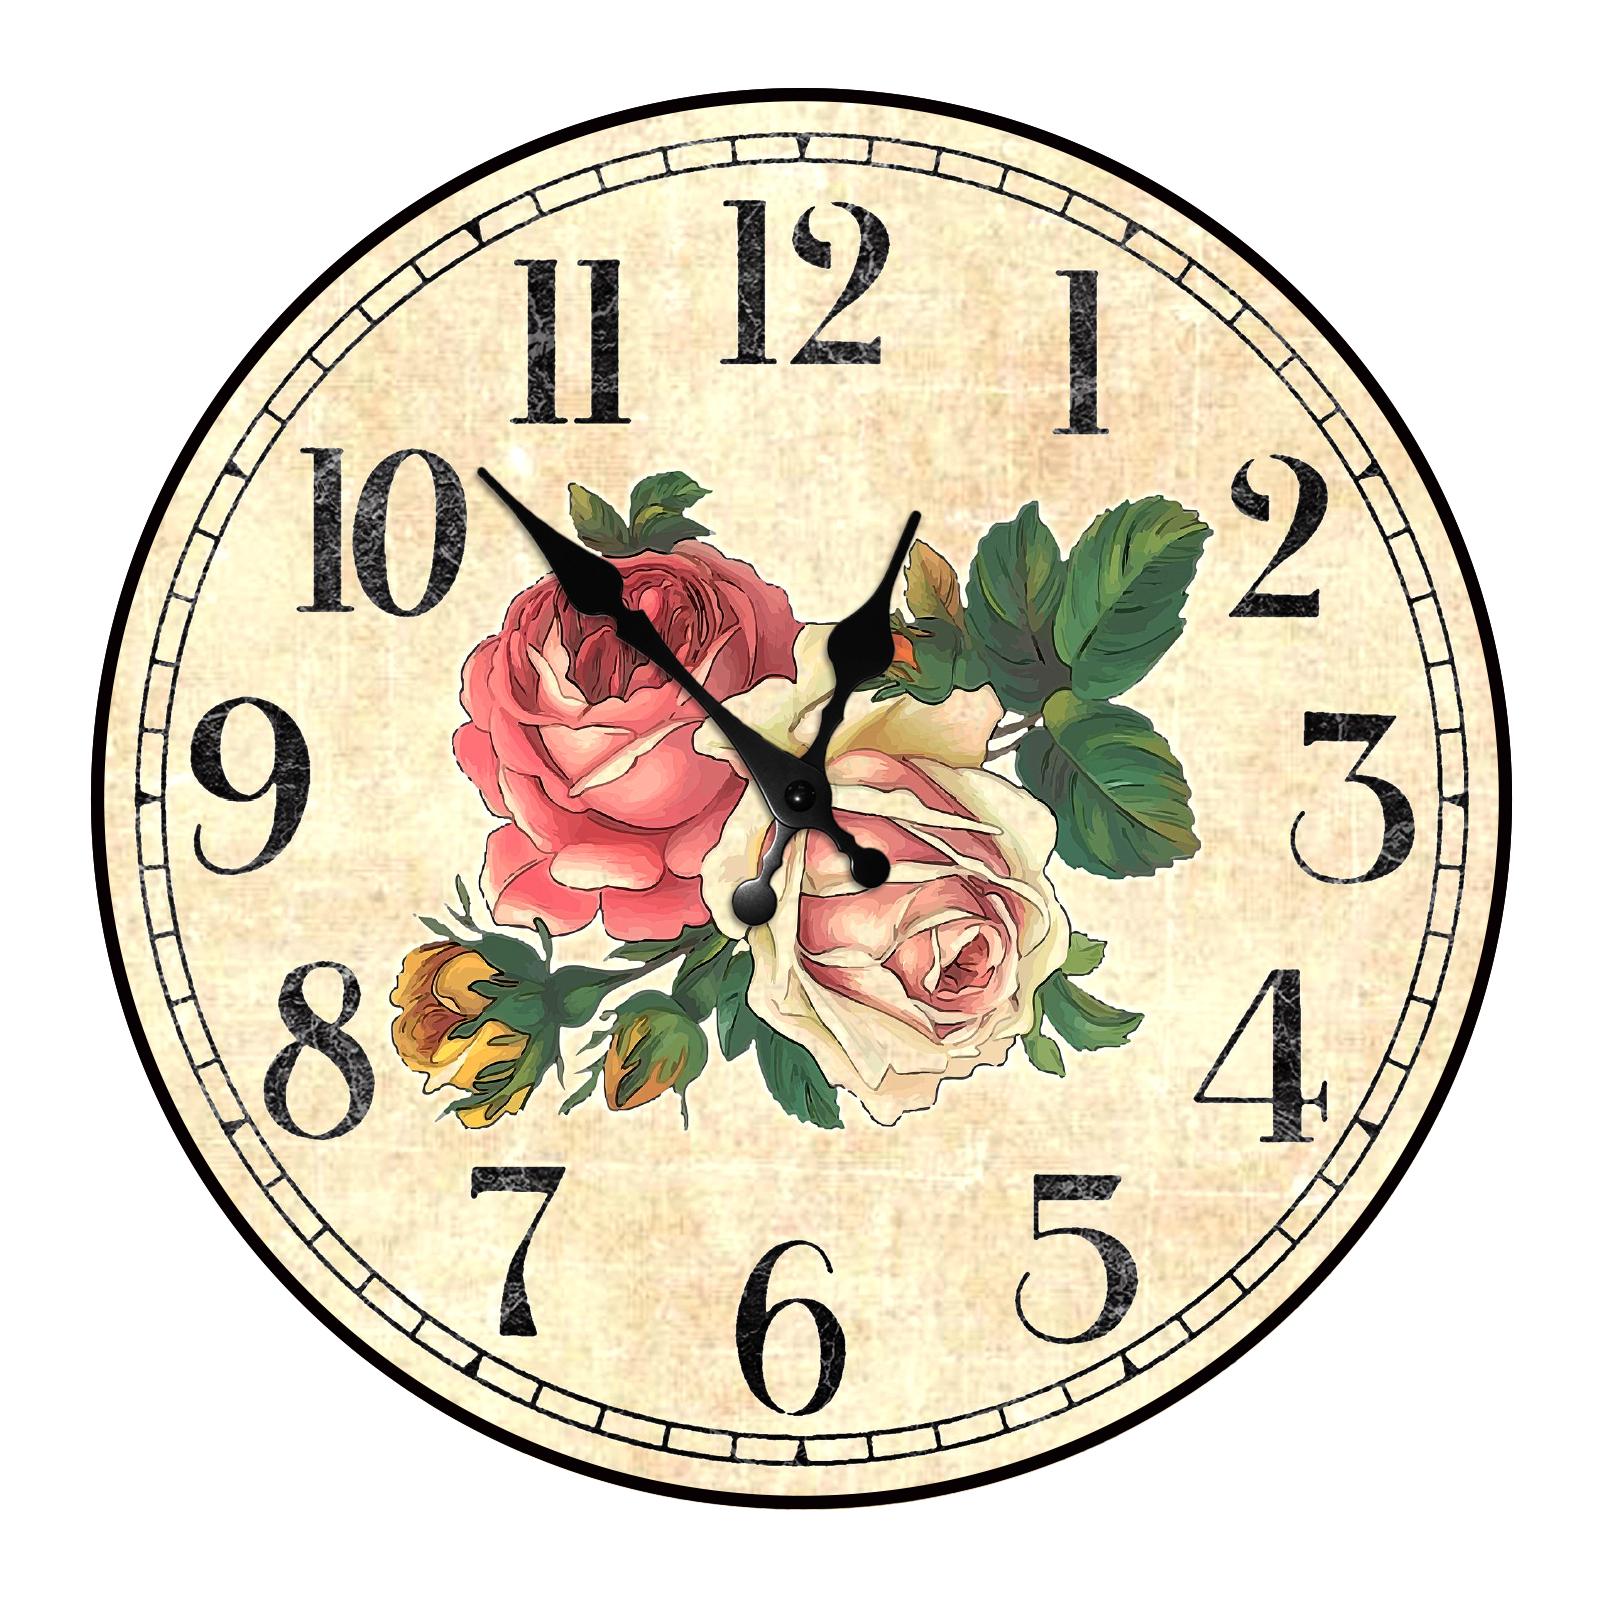 Home Vintage French Kitchen Large Wooden Wall Clock Silent Non-Ticking Quartz Round Wood Wall Clock Modern Design Wall Art Clock